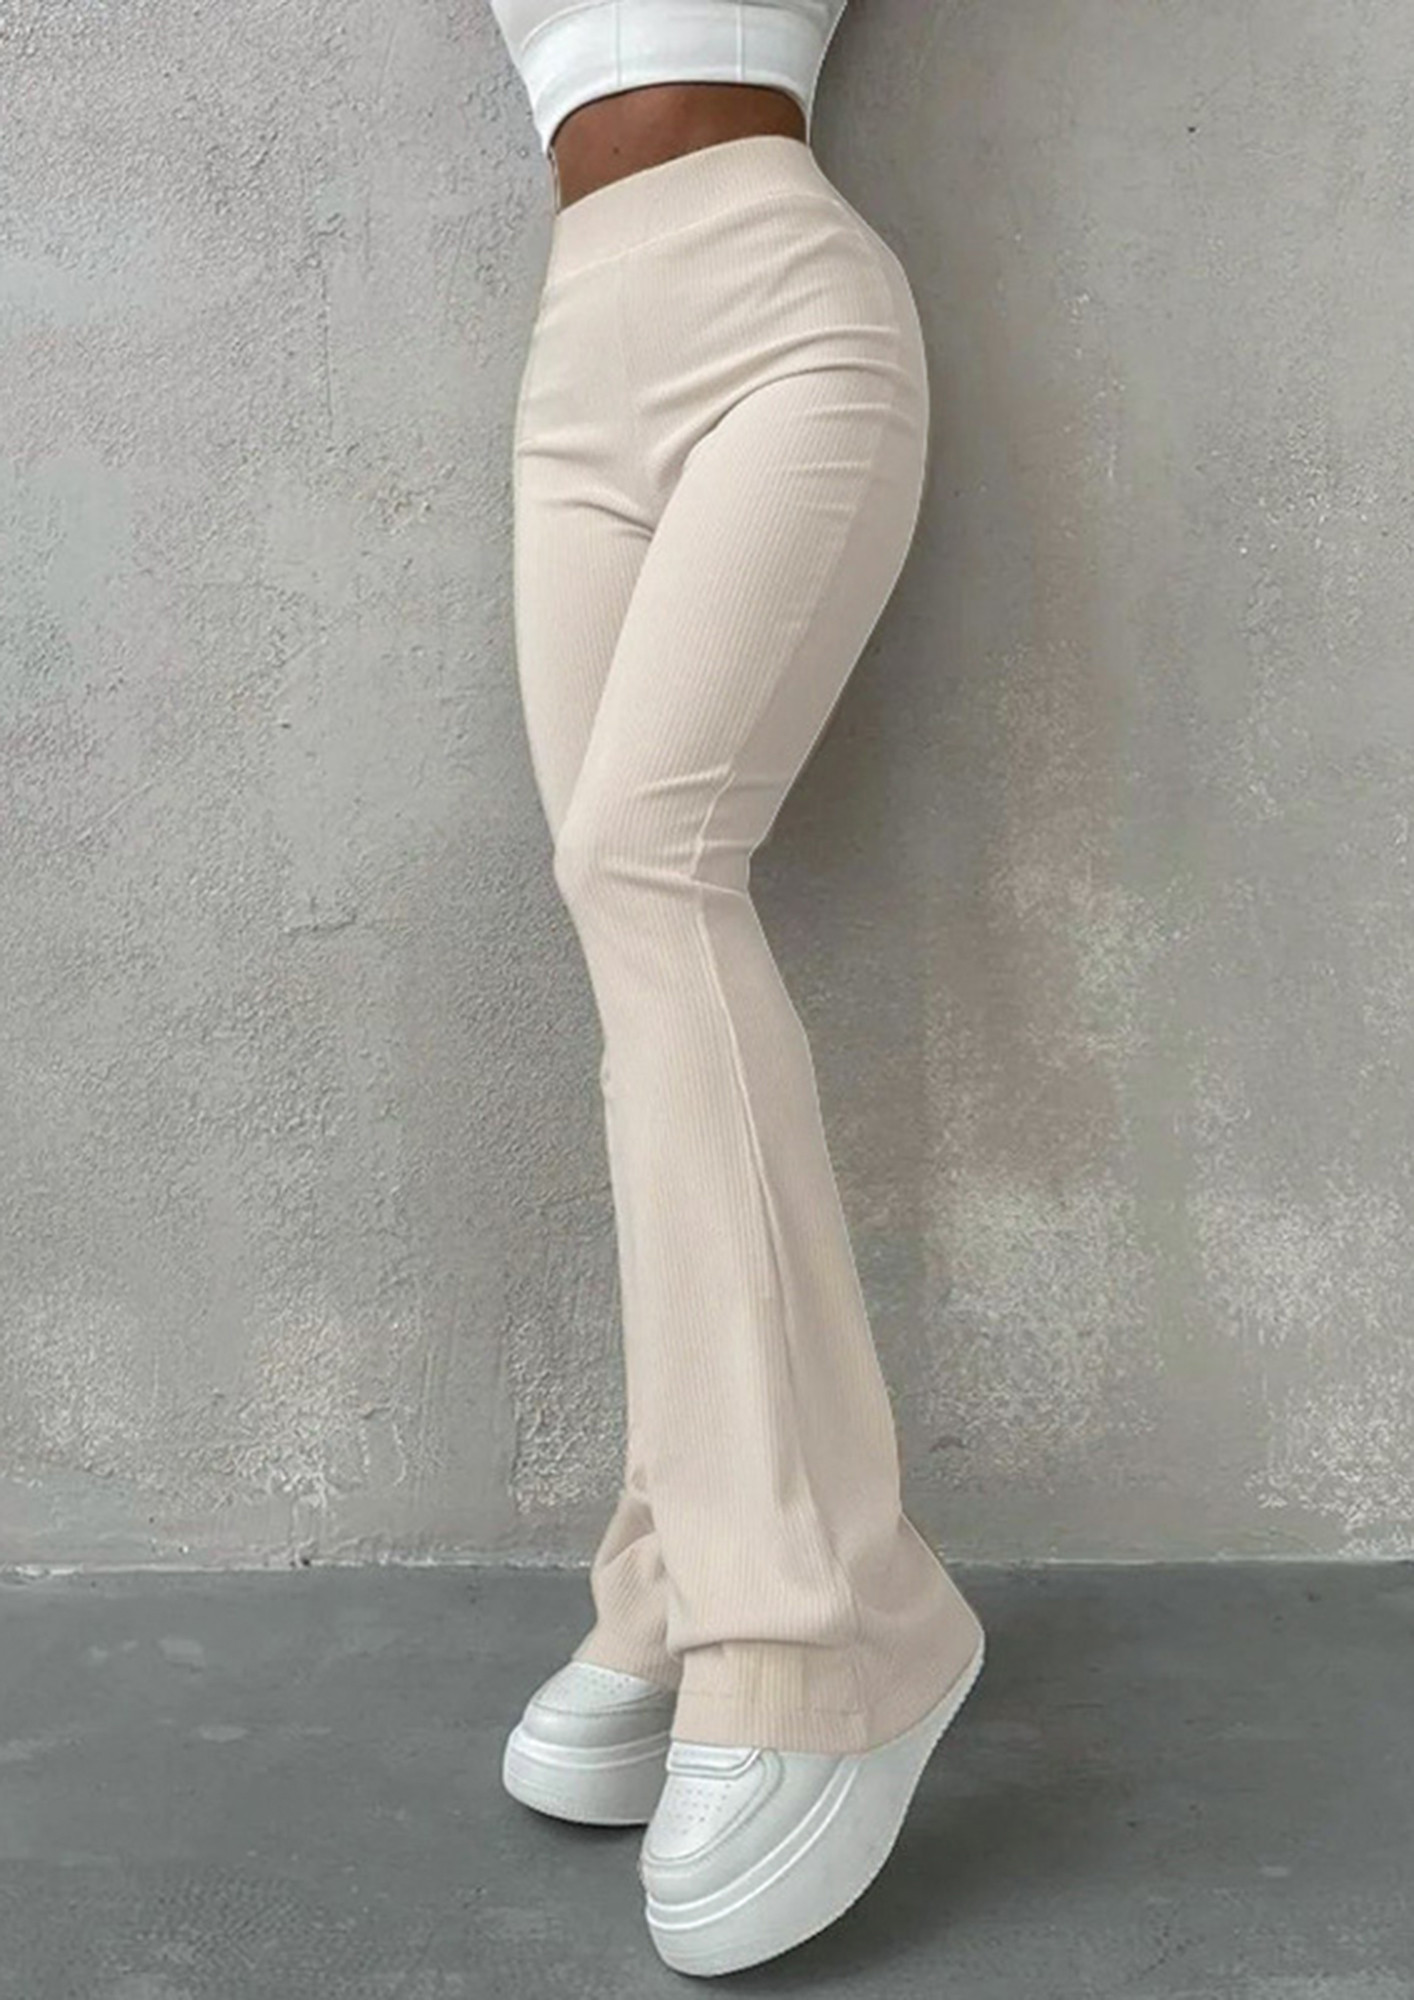 Rust bootcut flare pants & trousers for women casual and office wear.